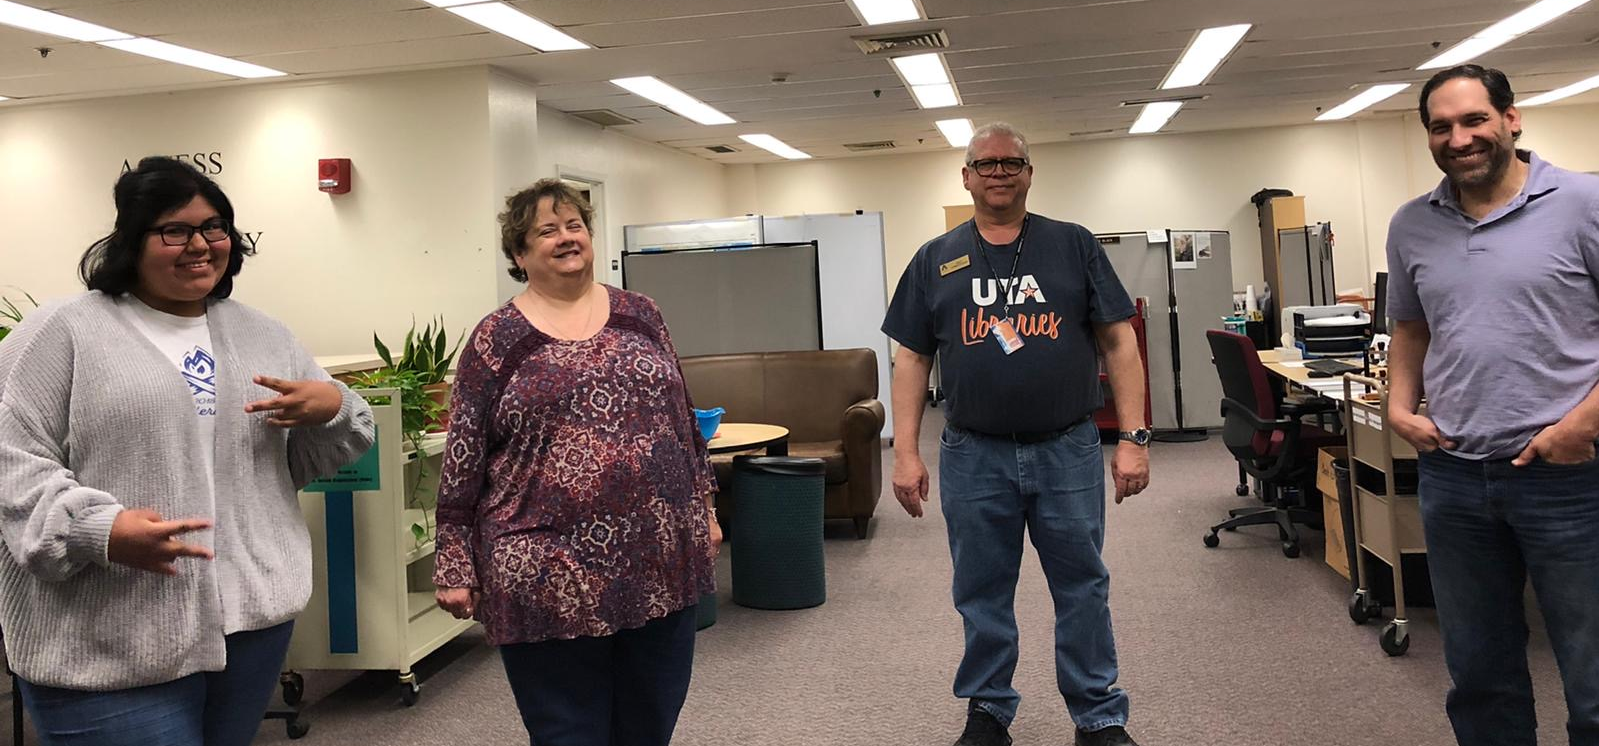 four people stand in the library basement and smile at the camera